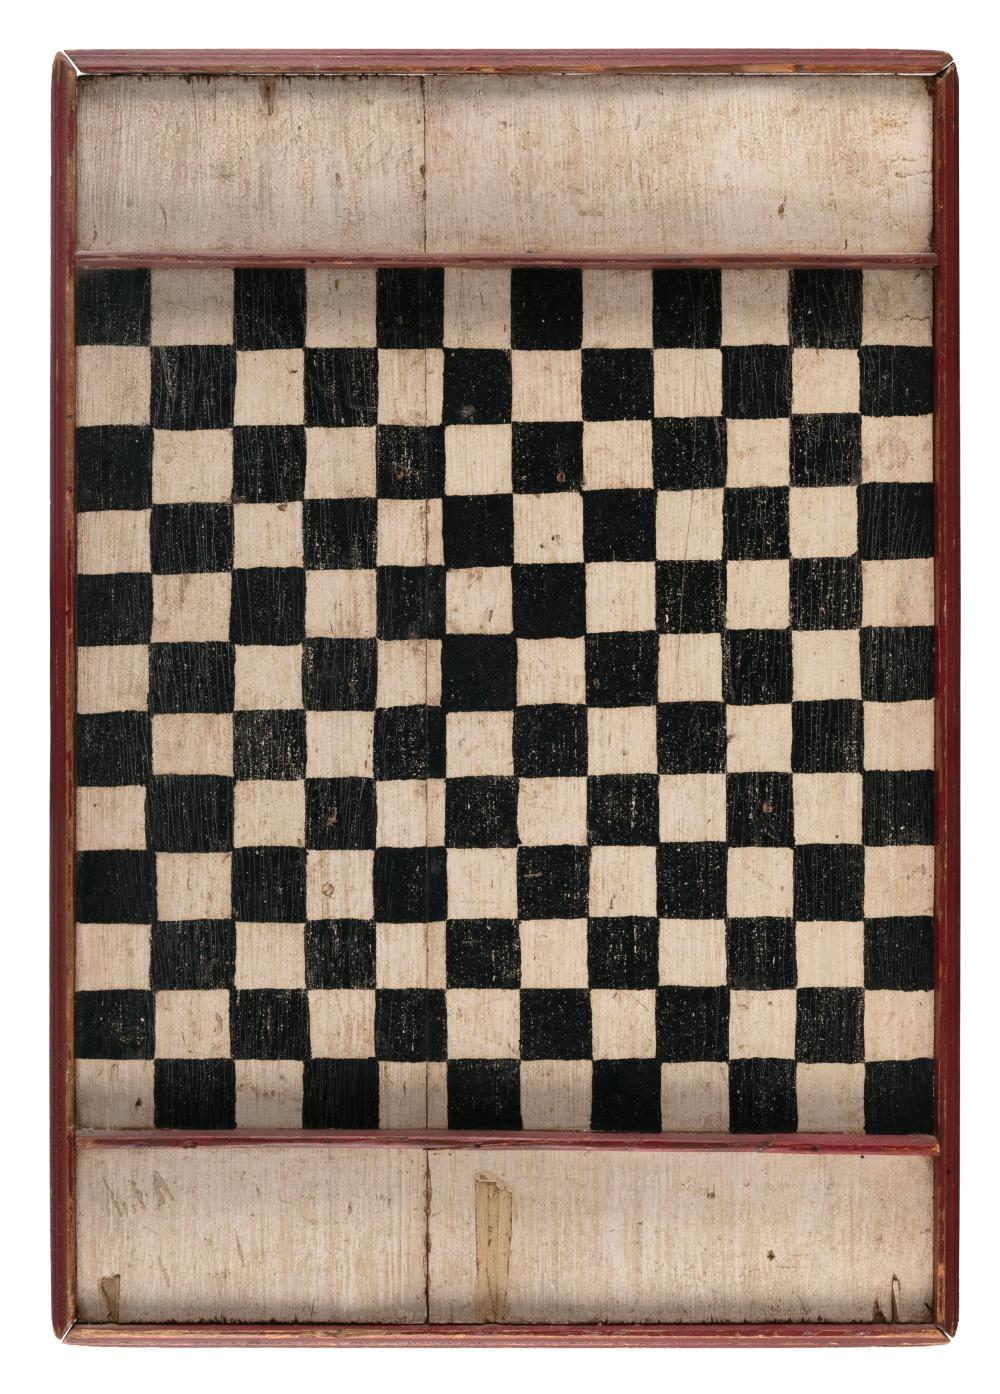 PAINTED GAME BOARD 19TH CENTURY